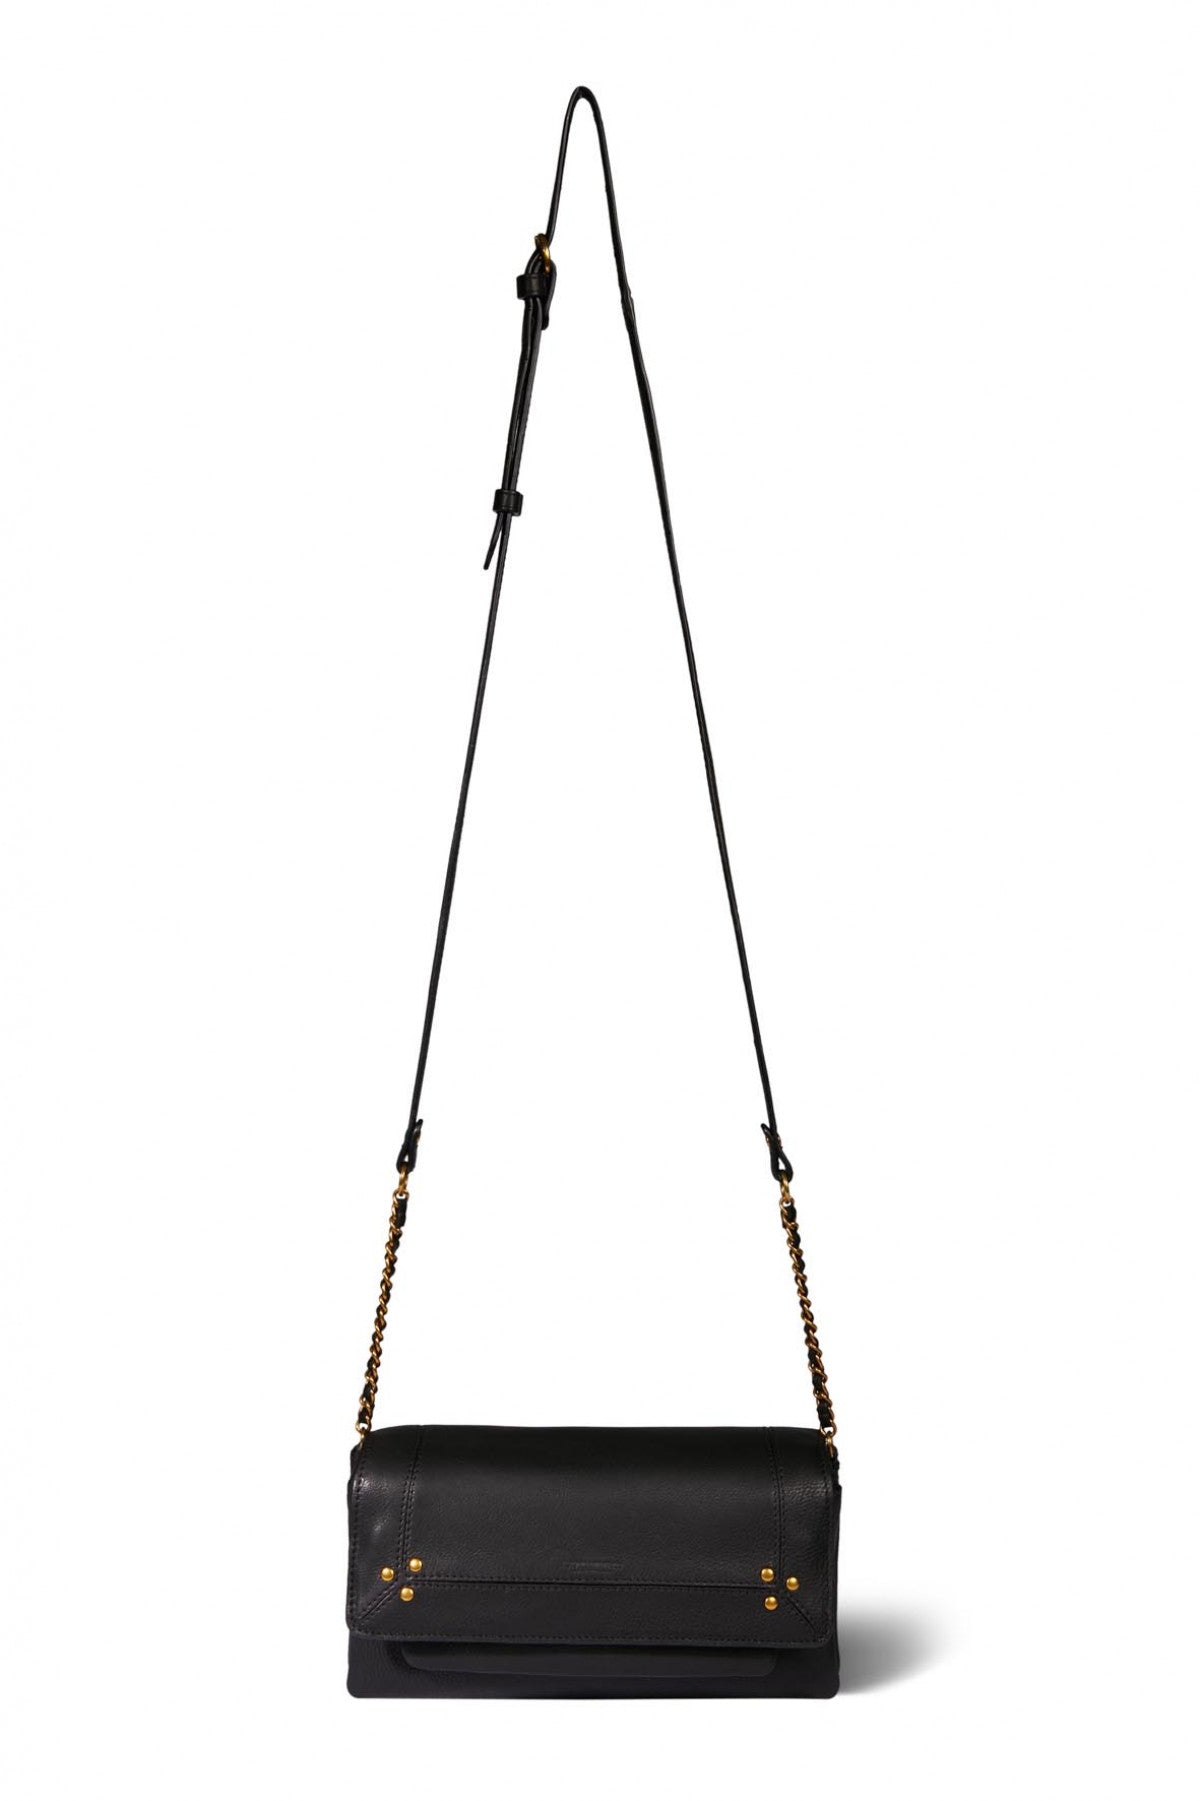 Dimensions: 24 x 15 x 5 CM Size bag wand shoulder or crossed  Strap chain and leather, adjustable from 115 CM (maximum) Rabat with snap closure Multi pockets Zipped Card slots  Logo embossed on the front The famous small metal rivets signing Bag 90% Calf 10% Goat / Lining 100% Cotton